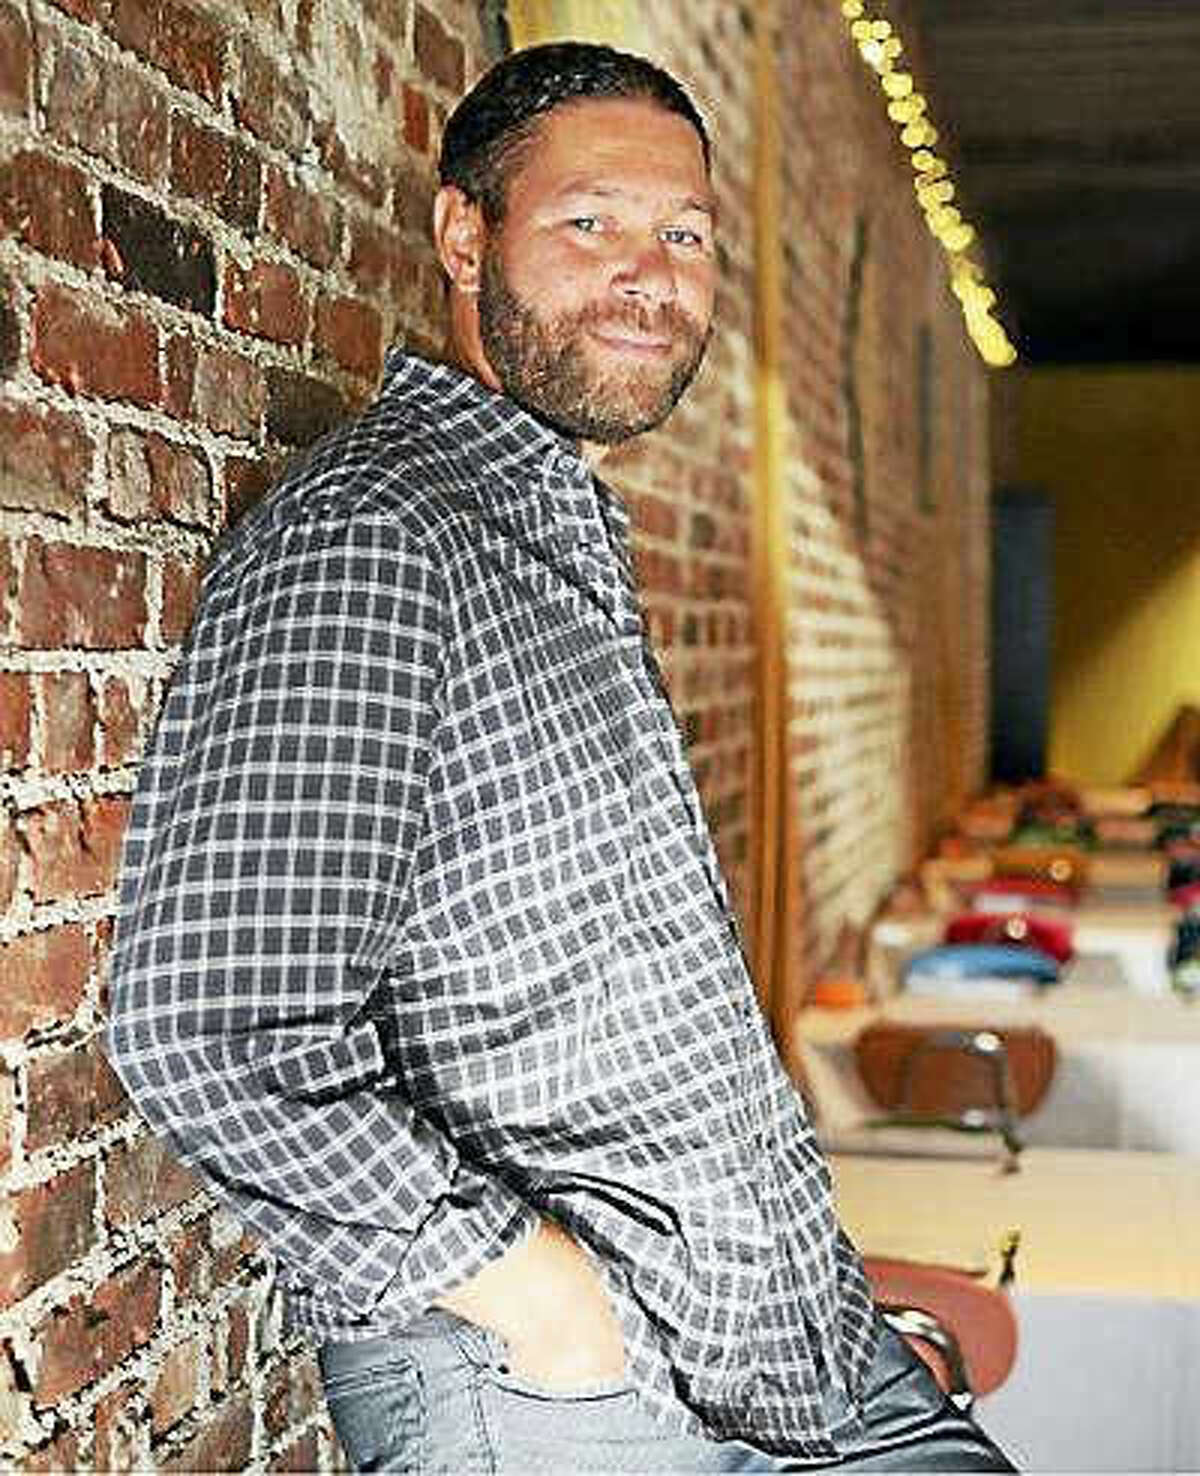 Contributed photo John Bourdeau, owner of Main Street Grill in Watertown, will coordinate the preparation of a Farm to Table Dinner & Auction to benefit Flanders Nature Center on Aug. 21 in Woodbury. He will be joined by other chefs from some of the county’s most popular restaurants.